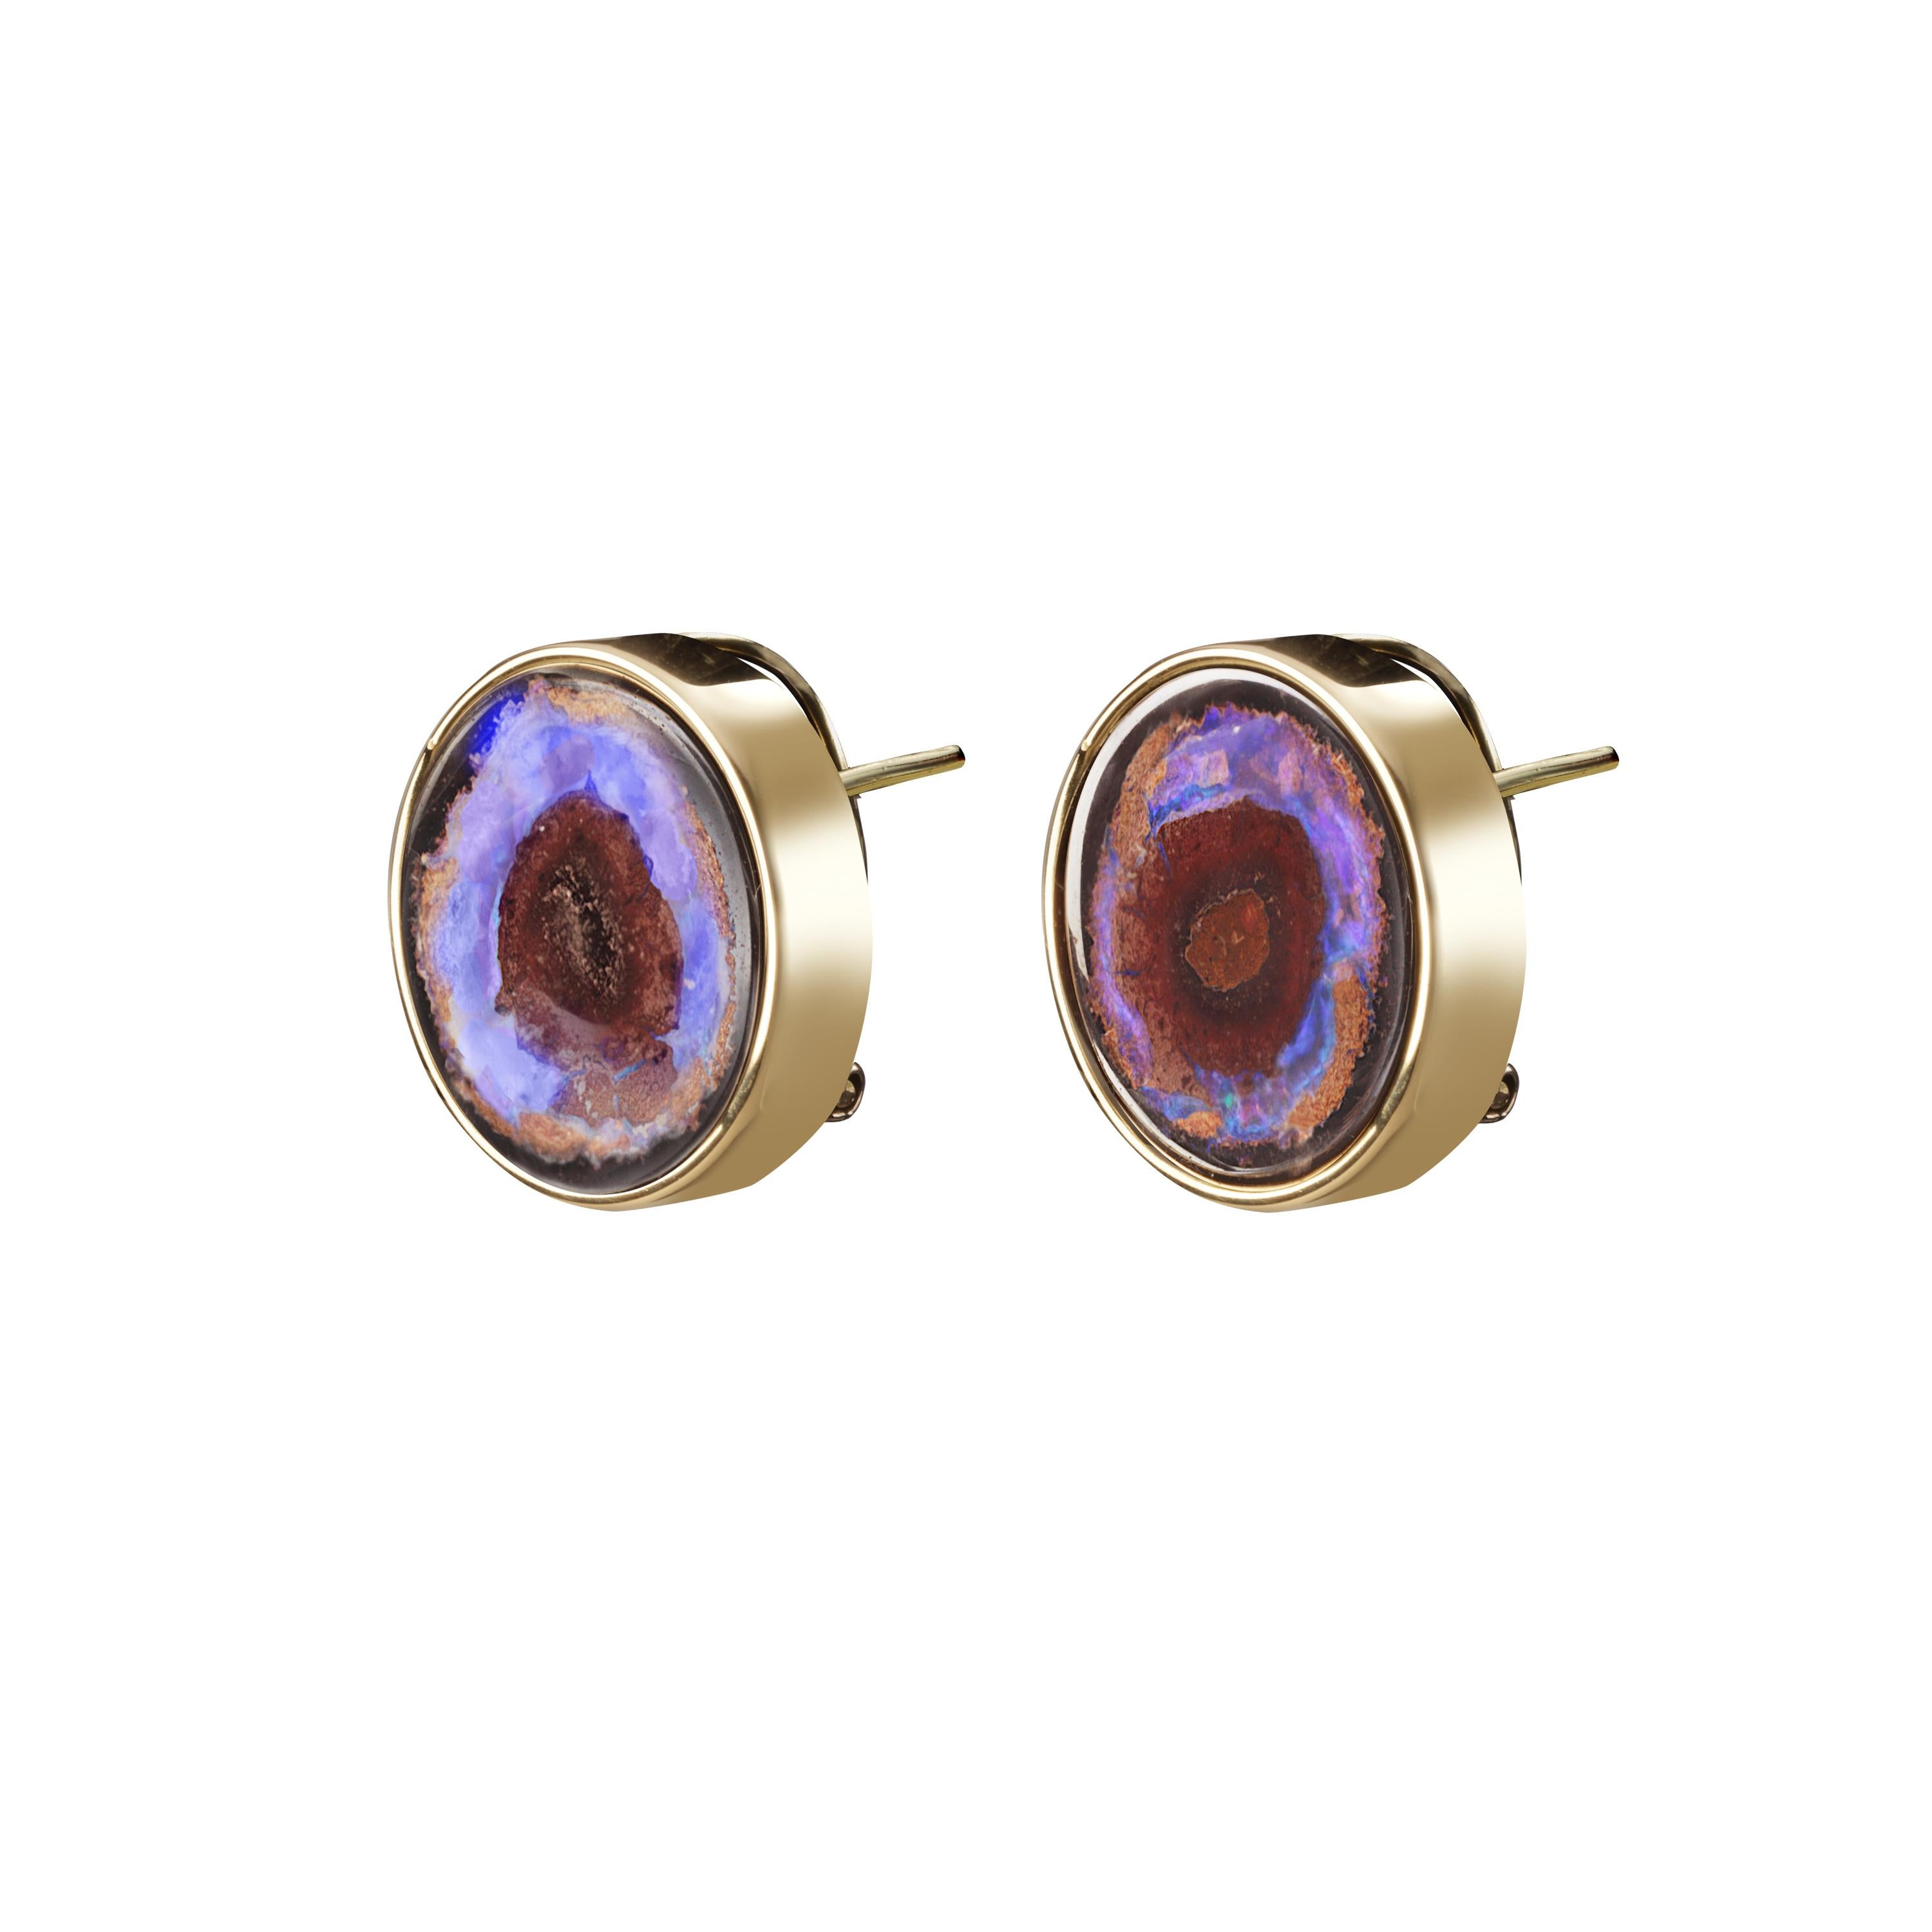 These stud earrings are handmade in 18k yellow gold with two unusual Australian boulder opals.
These two opals, a fantastic  pair, have a natural combination of  brown, blue and purple hues.
The earrings close with an omega clasp.
They are a unique